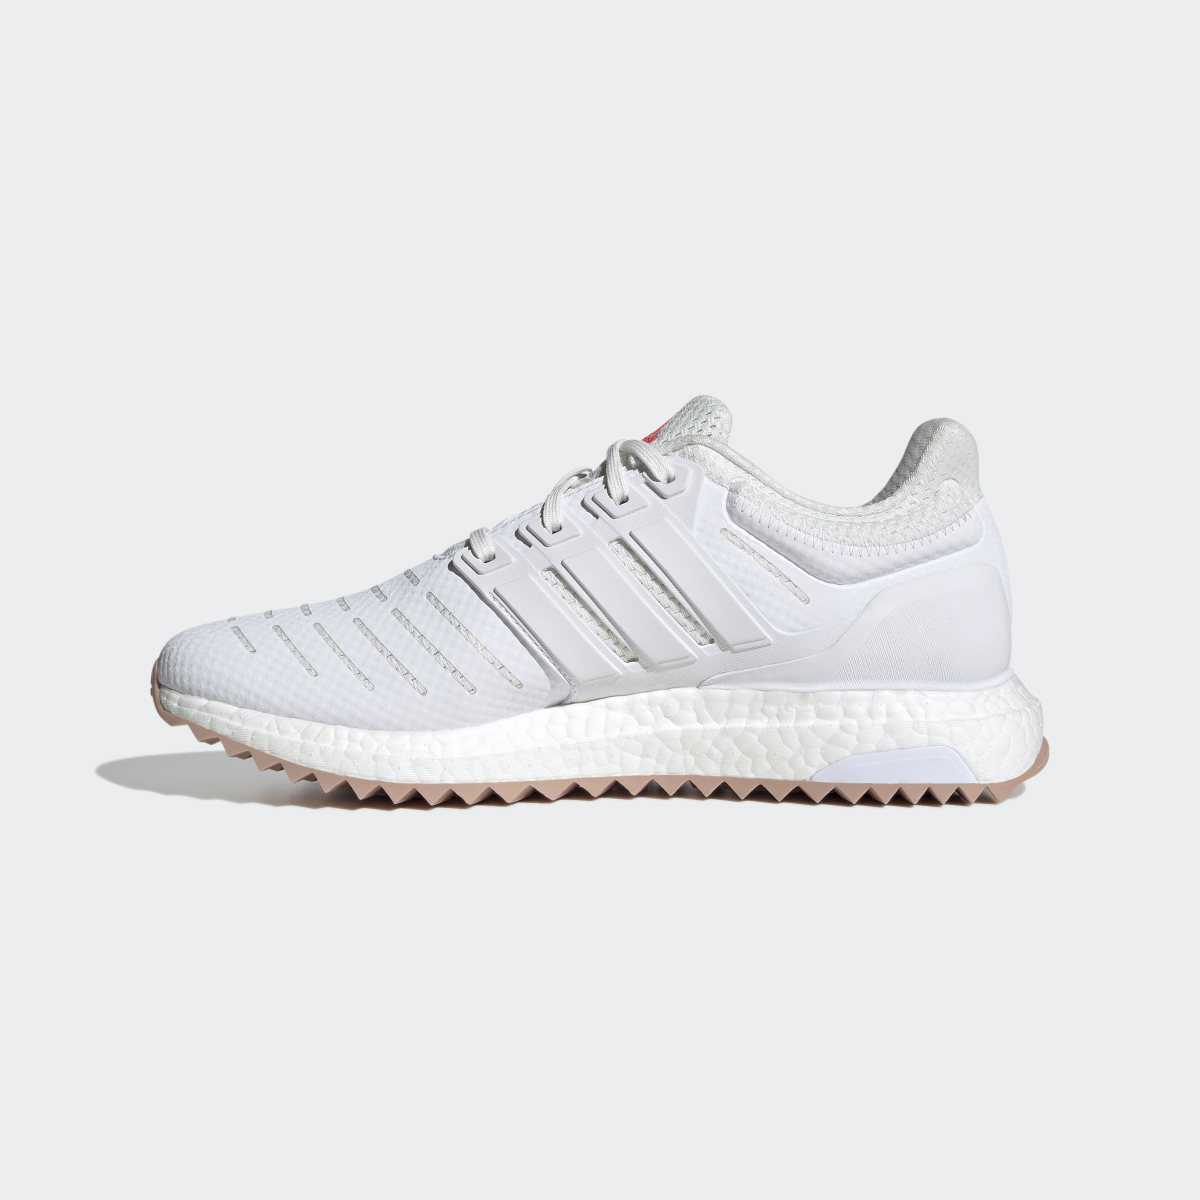 Adidas Chaussure Ultraboost DNA XXII Lifestyle Running Sportswear Capsule Collection. 7